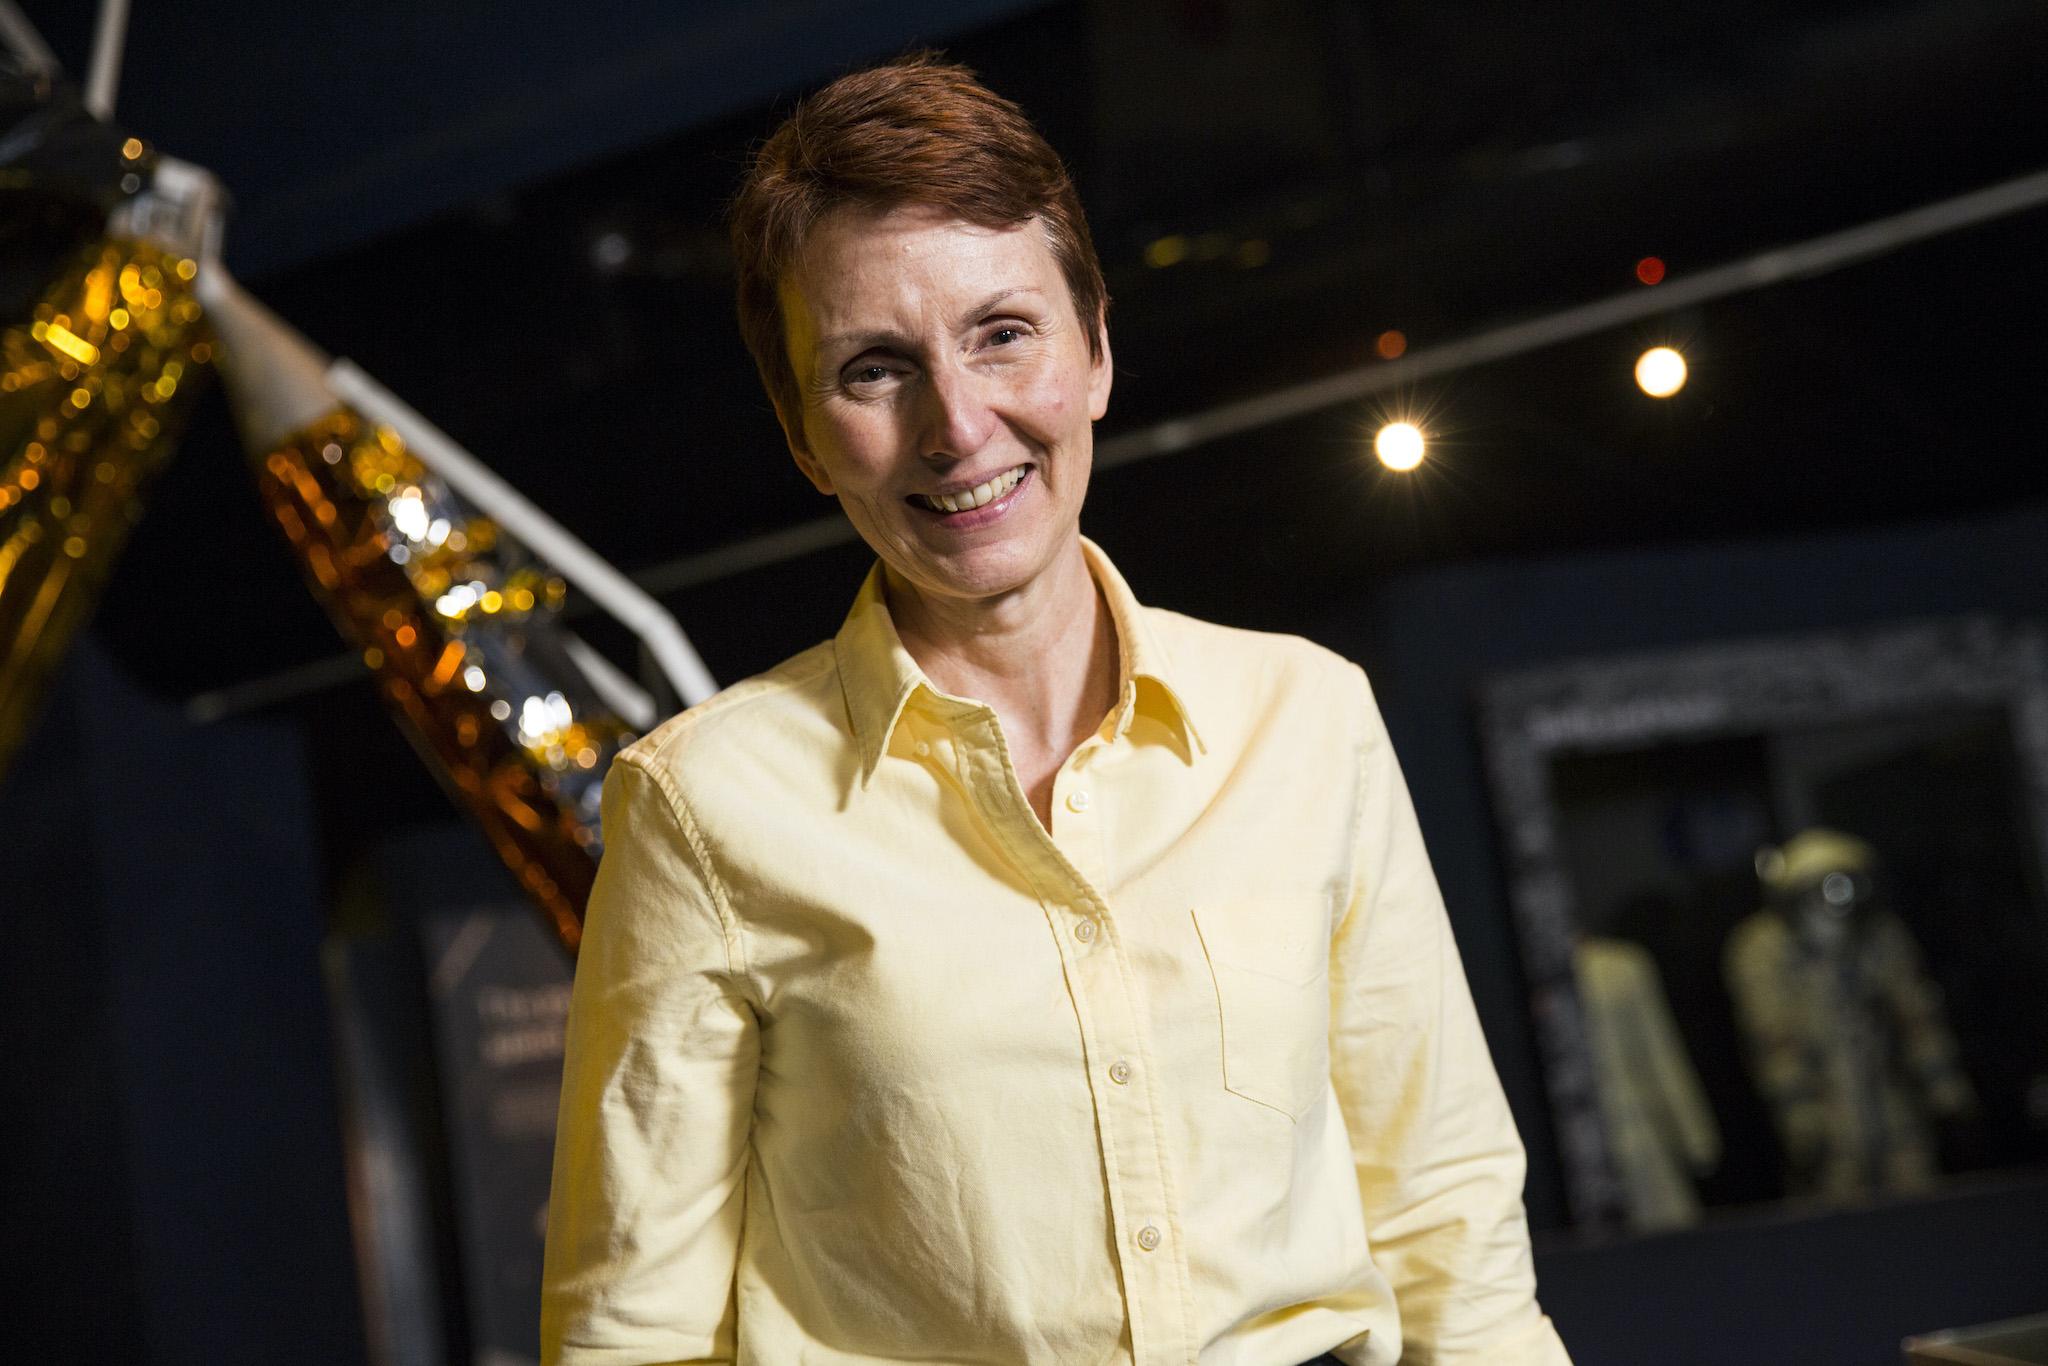 British astronaut Helen Sharman pictured at the Science Museum on May 20, 2016 in London, England